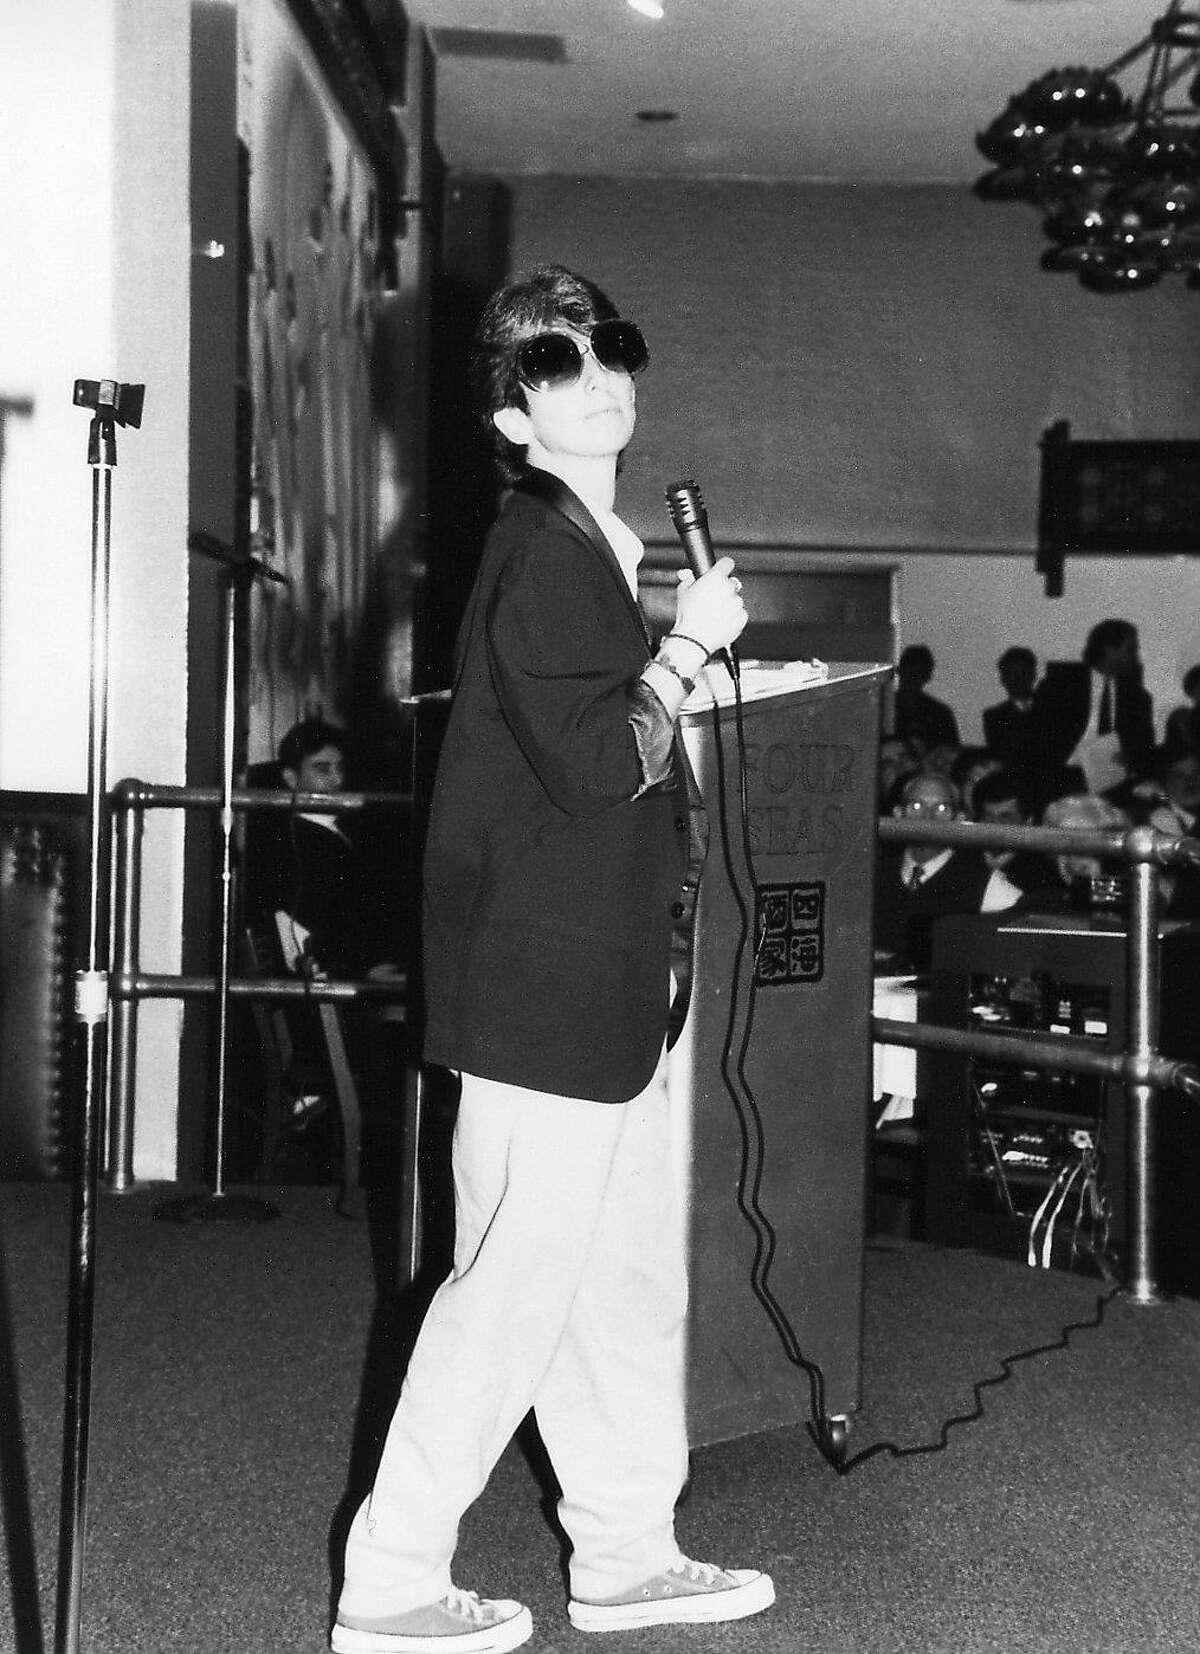 Lisa Geduldig at the first Kung Pao Kosher Comedy event Four Seas Restaurant in 1993.